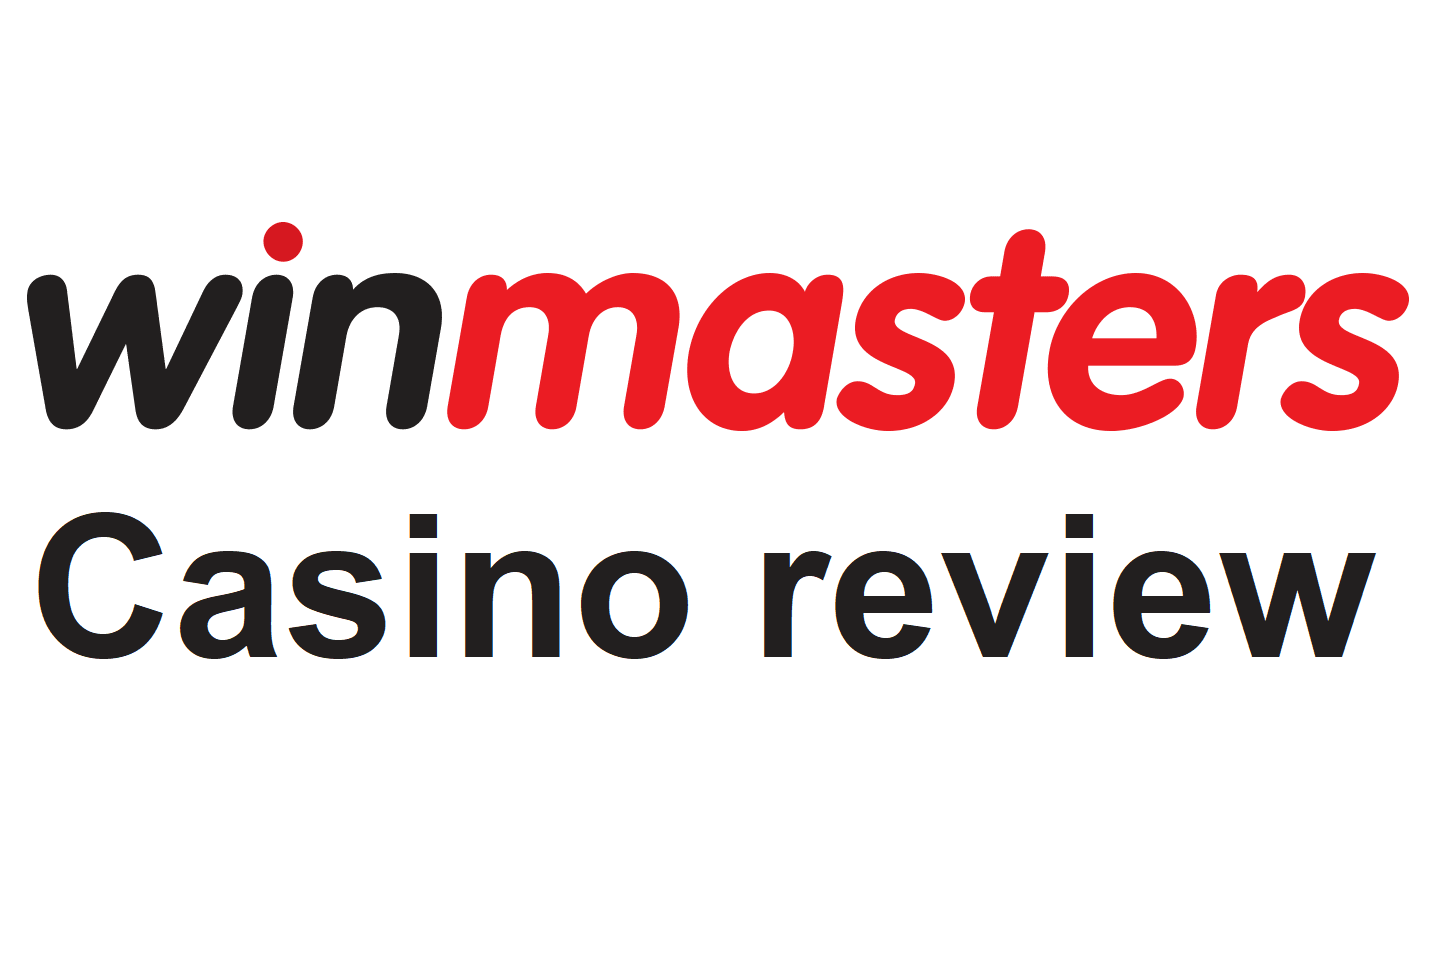 Winmasters casino review